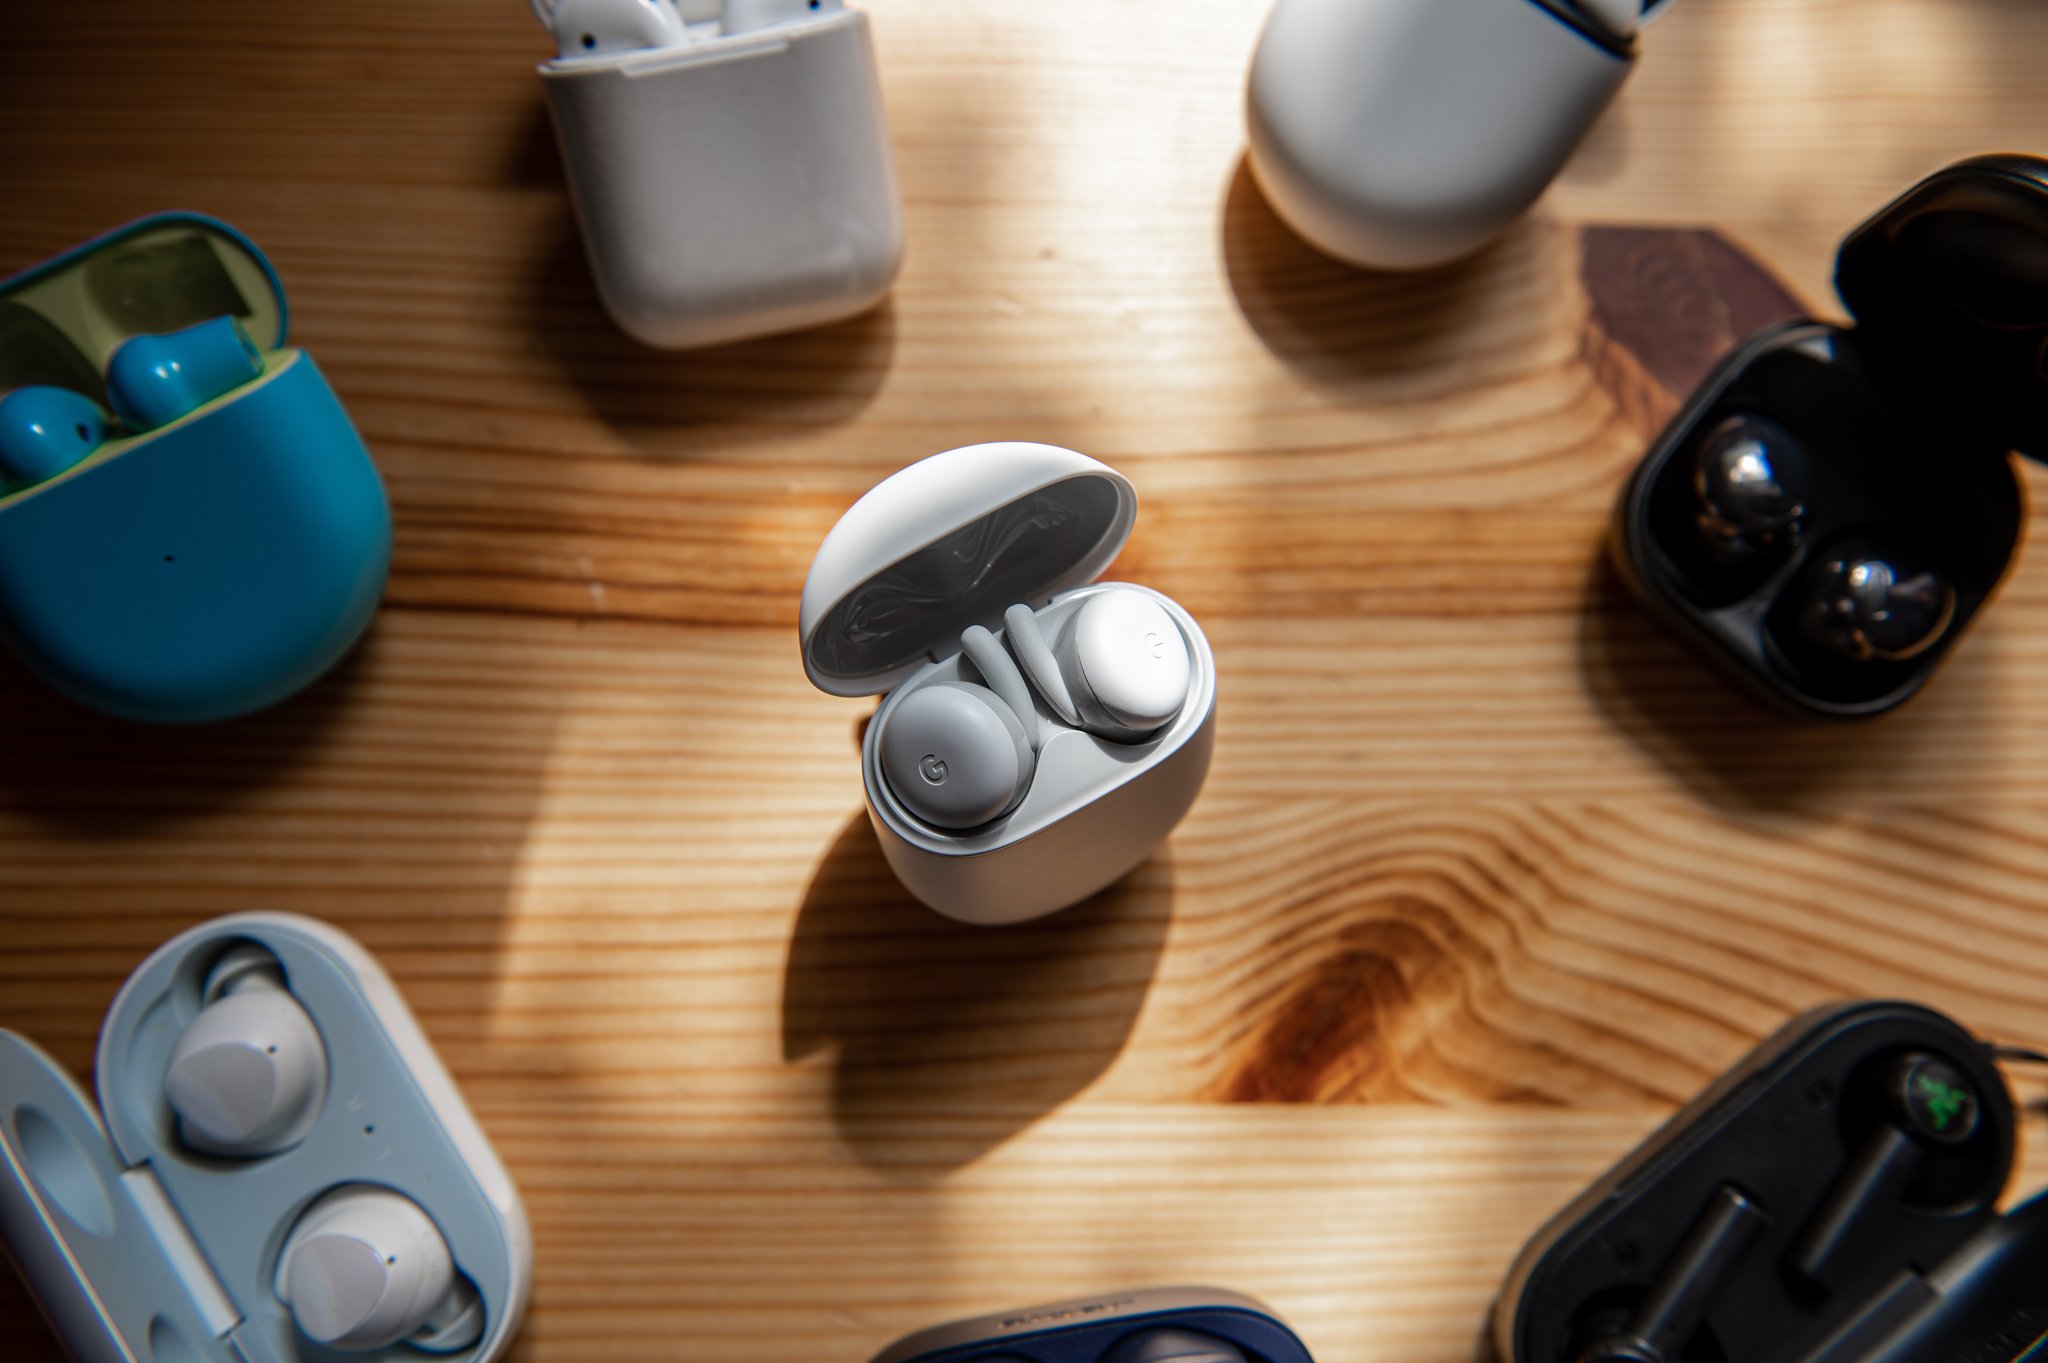 What are your next wireless earbuds?